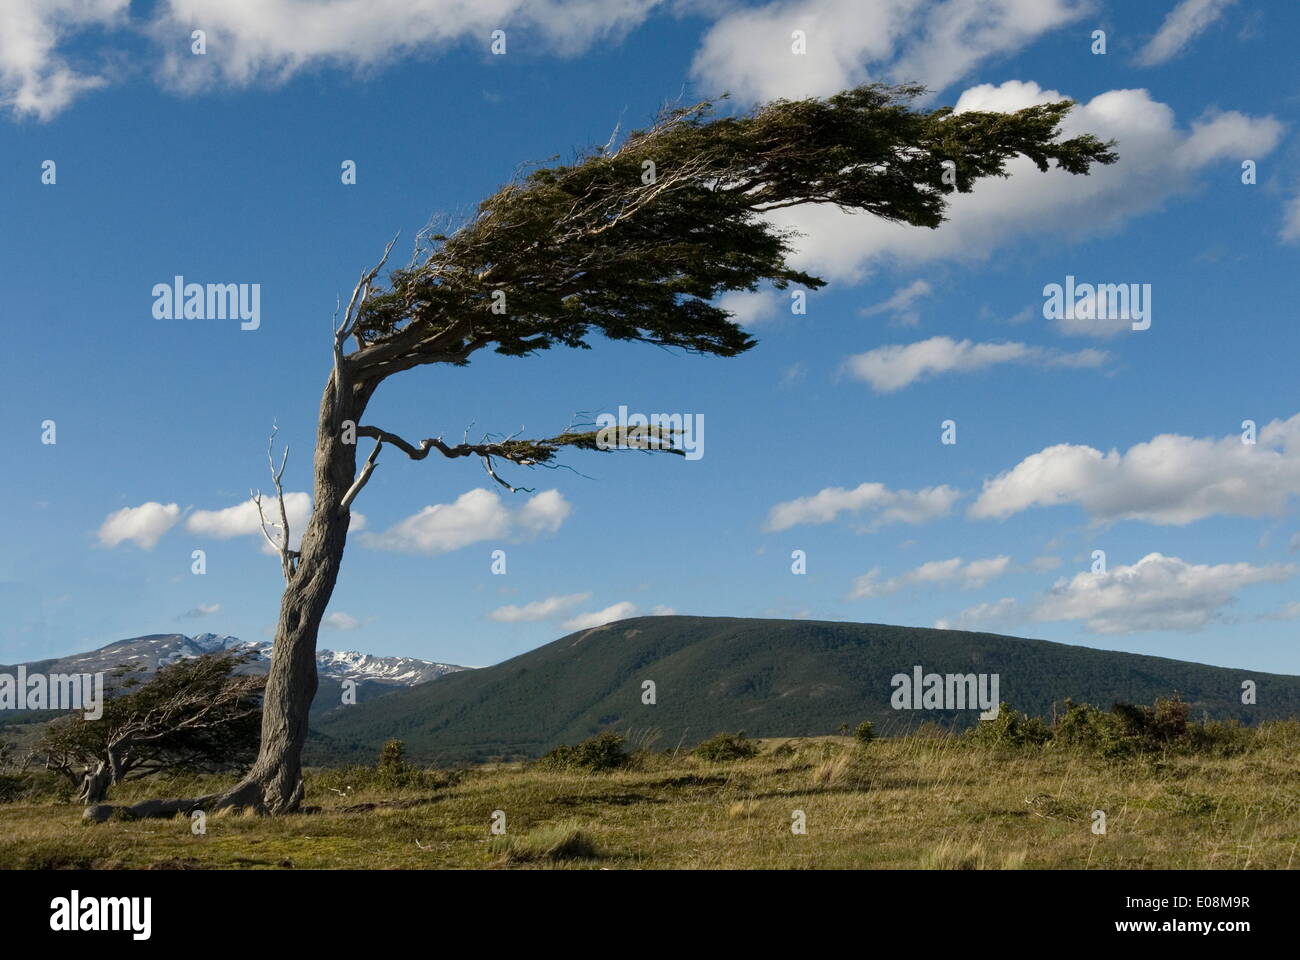 Tree distorted by winds of the Roaring Forties, Harberton, Ushuaia, Beagle Channel, Tierra del Fuego, Argentina, South America Stock Photo